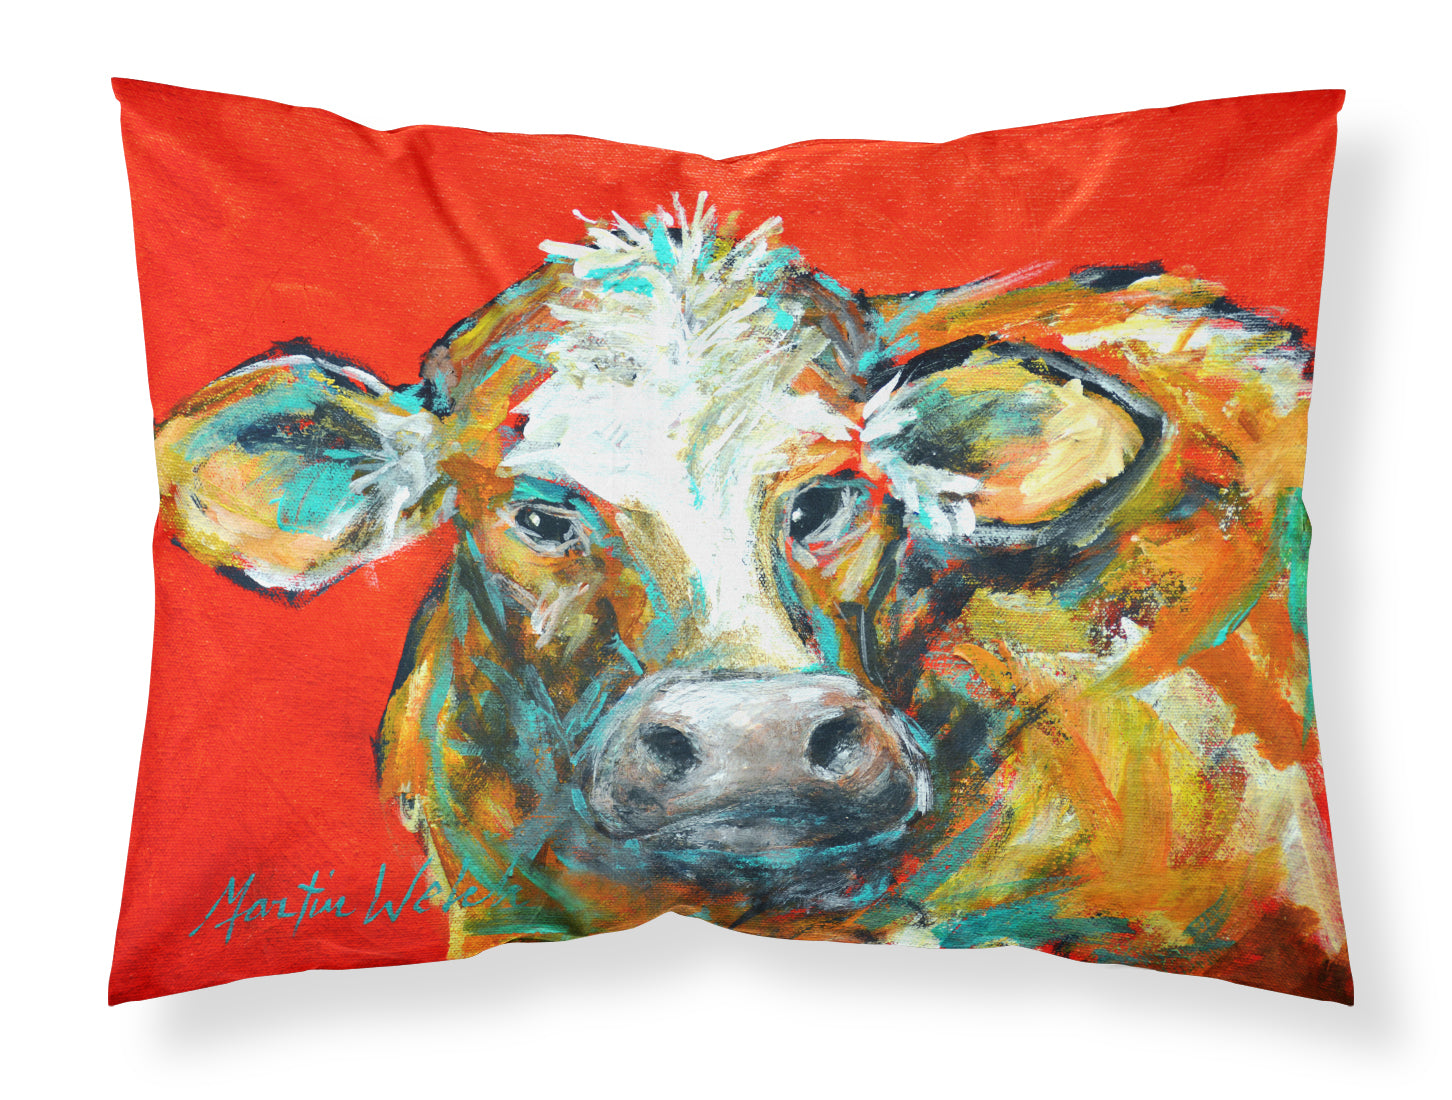 Buy this Caught Red Handed Cow Fabric Standard Pillowcase